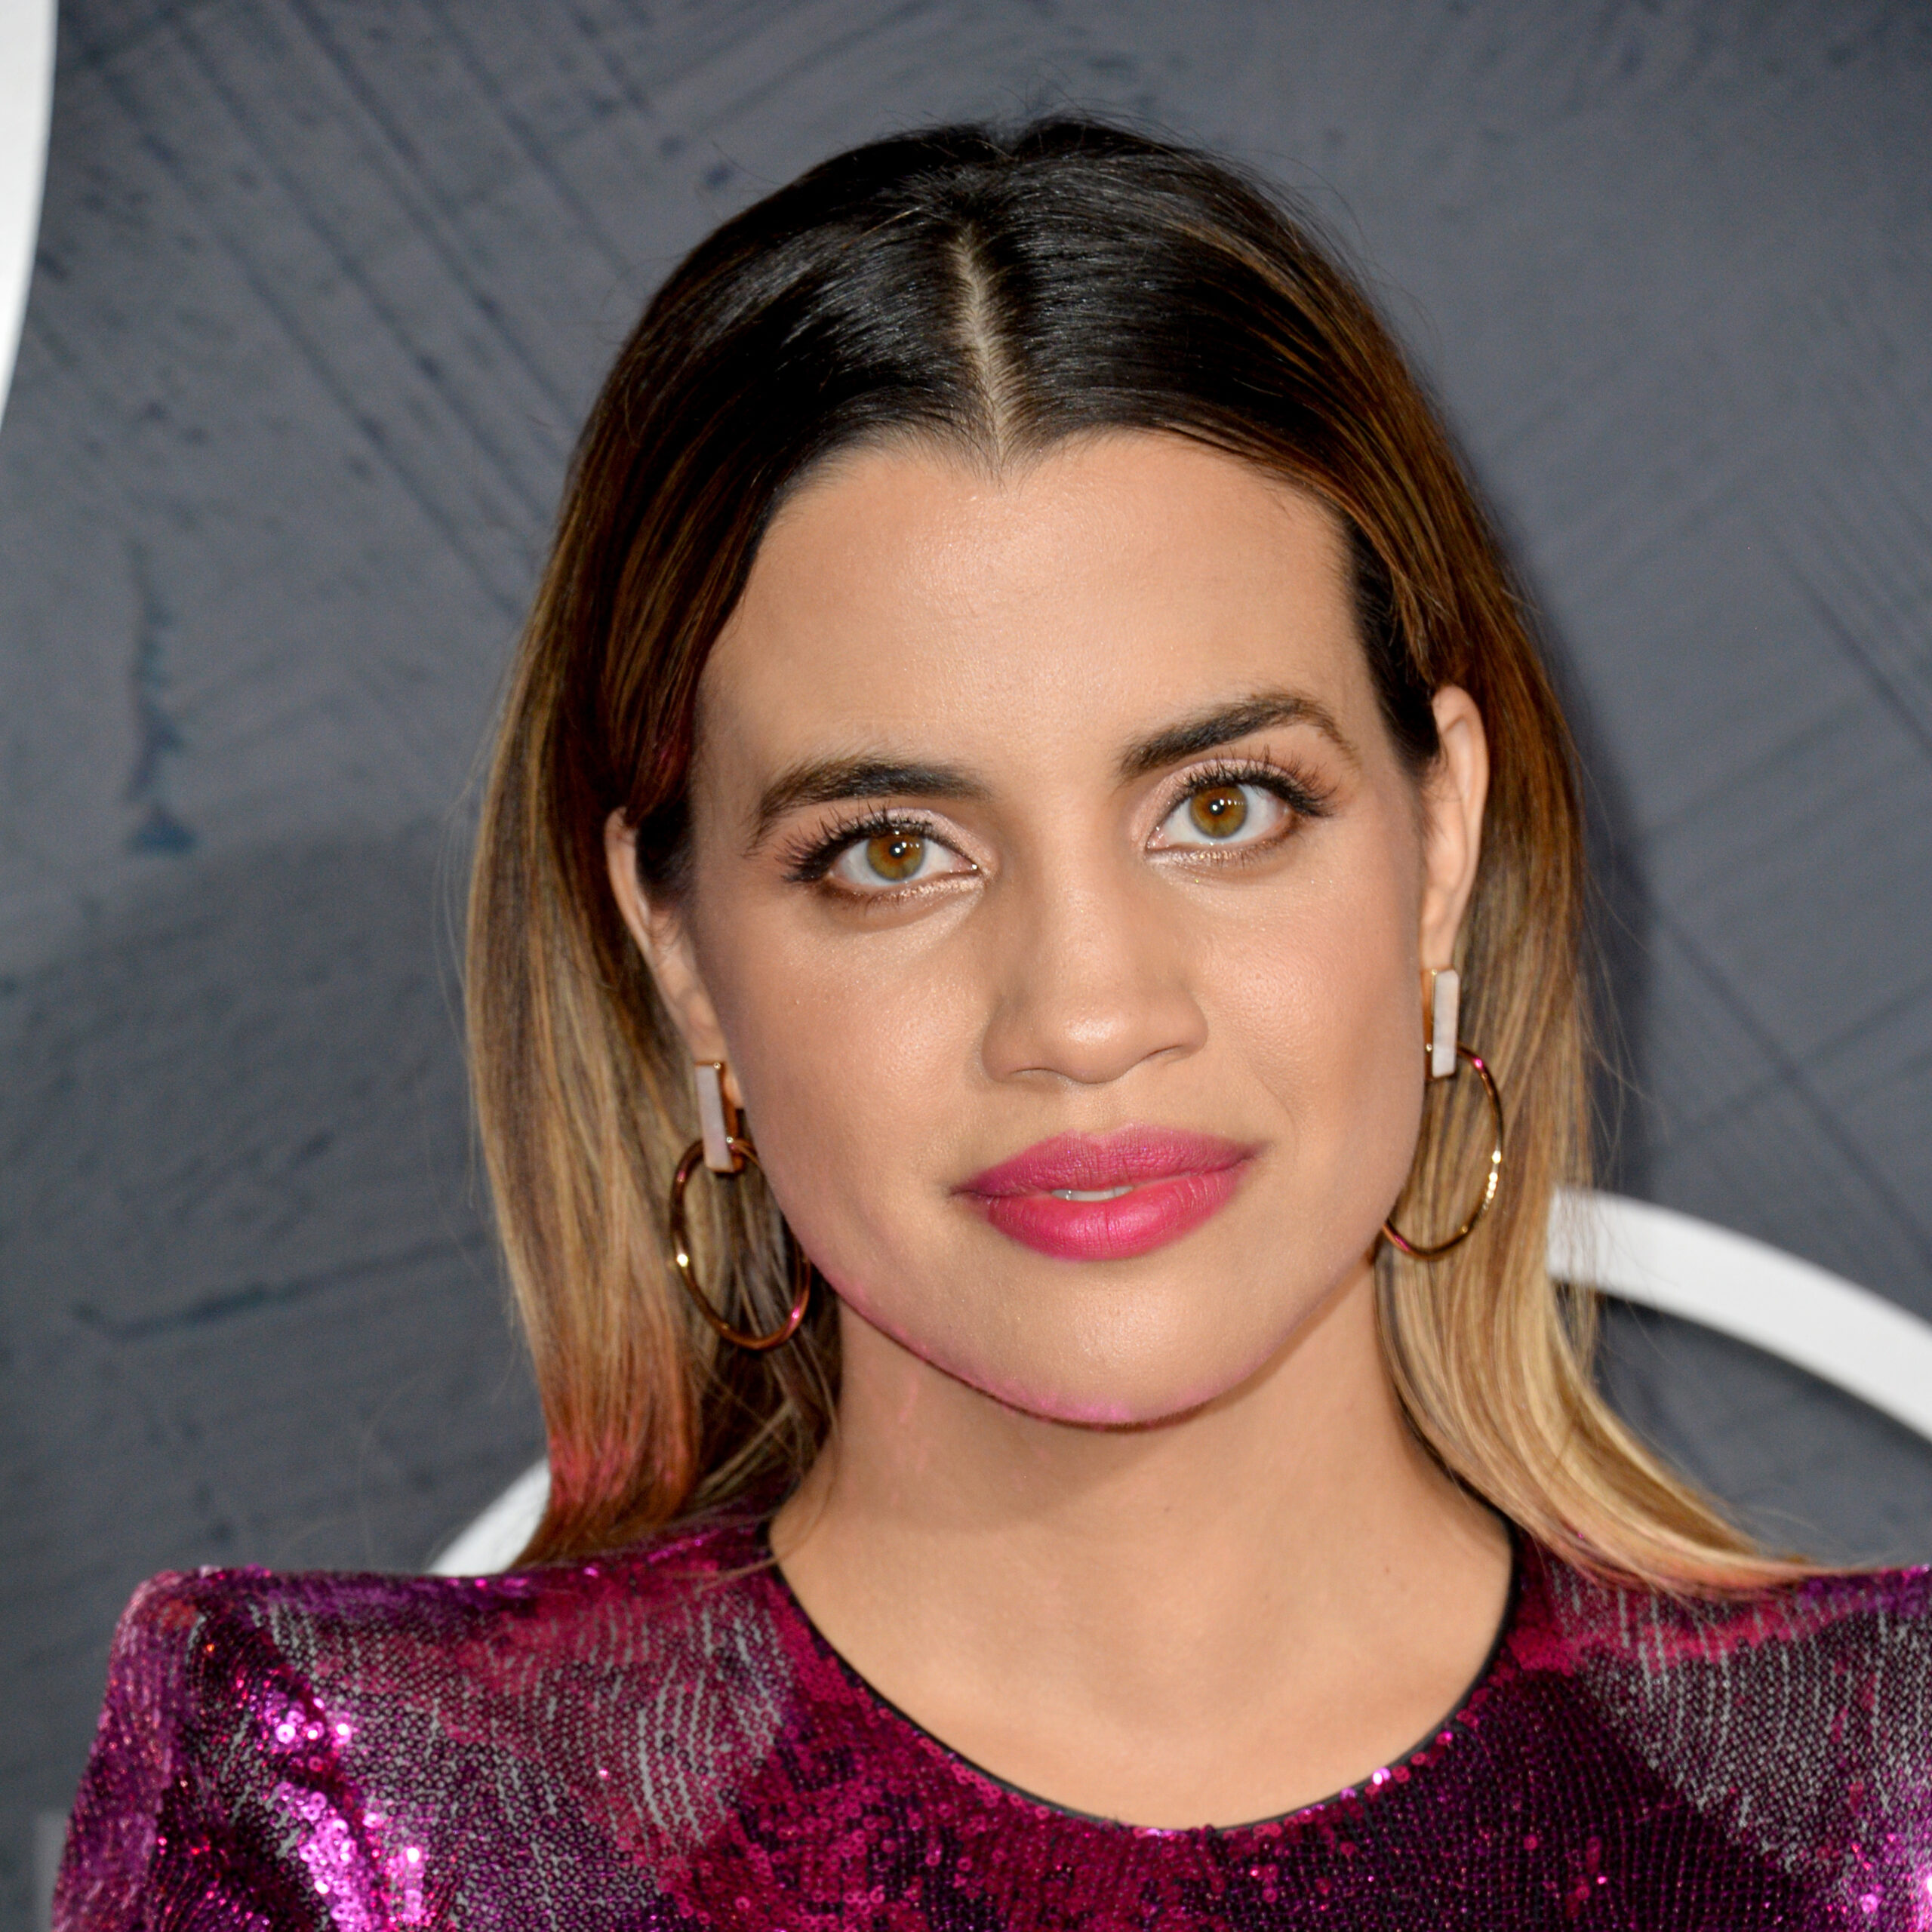 Natalie Morales Agent Manager Publicist Contact Info 